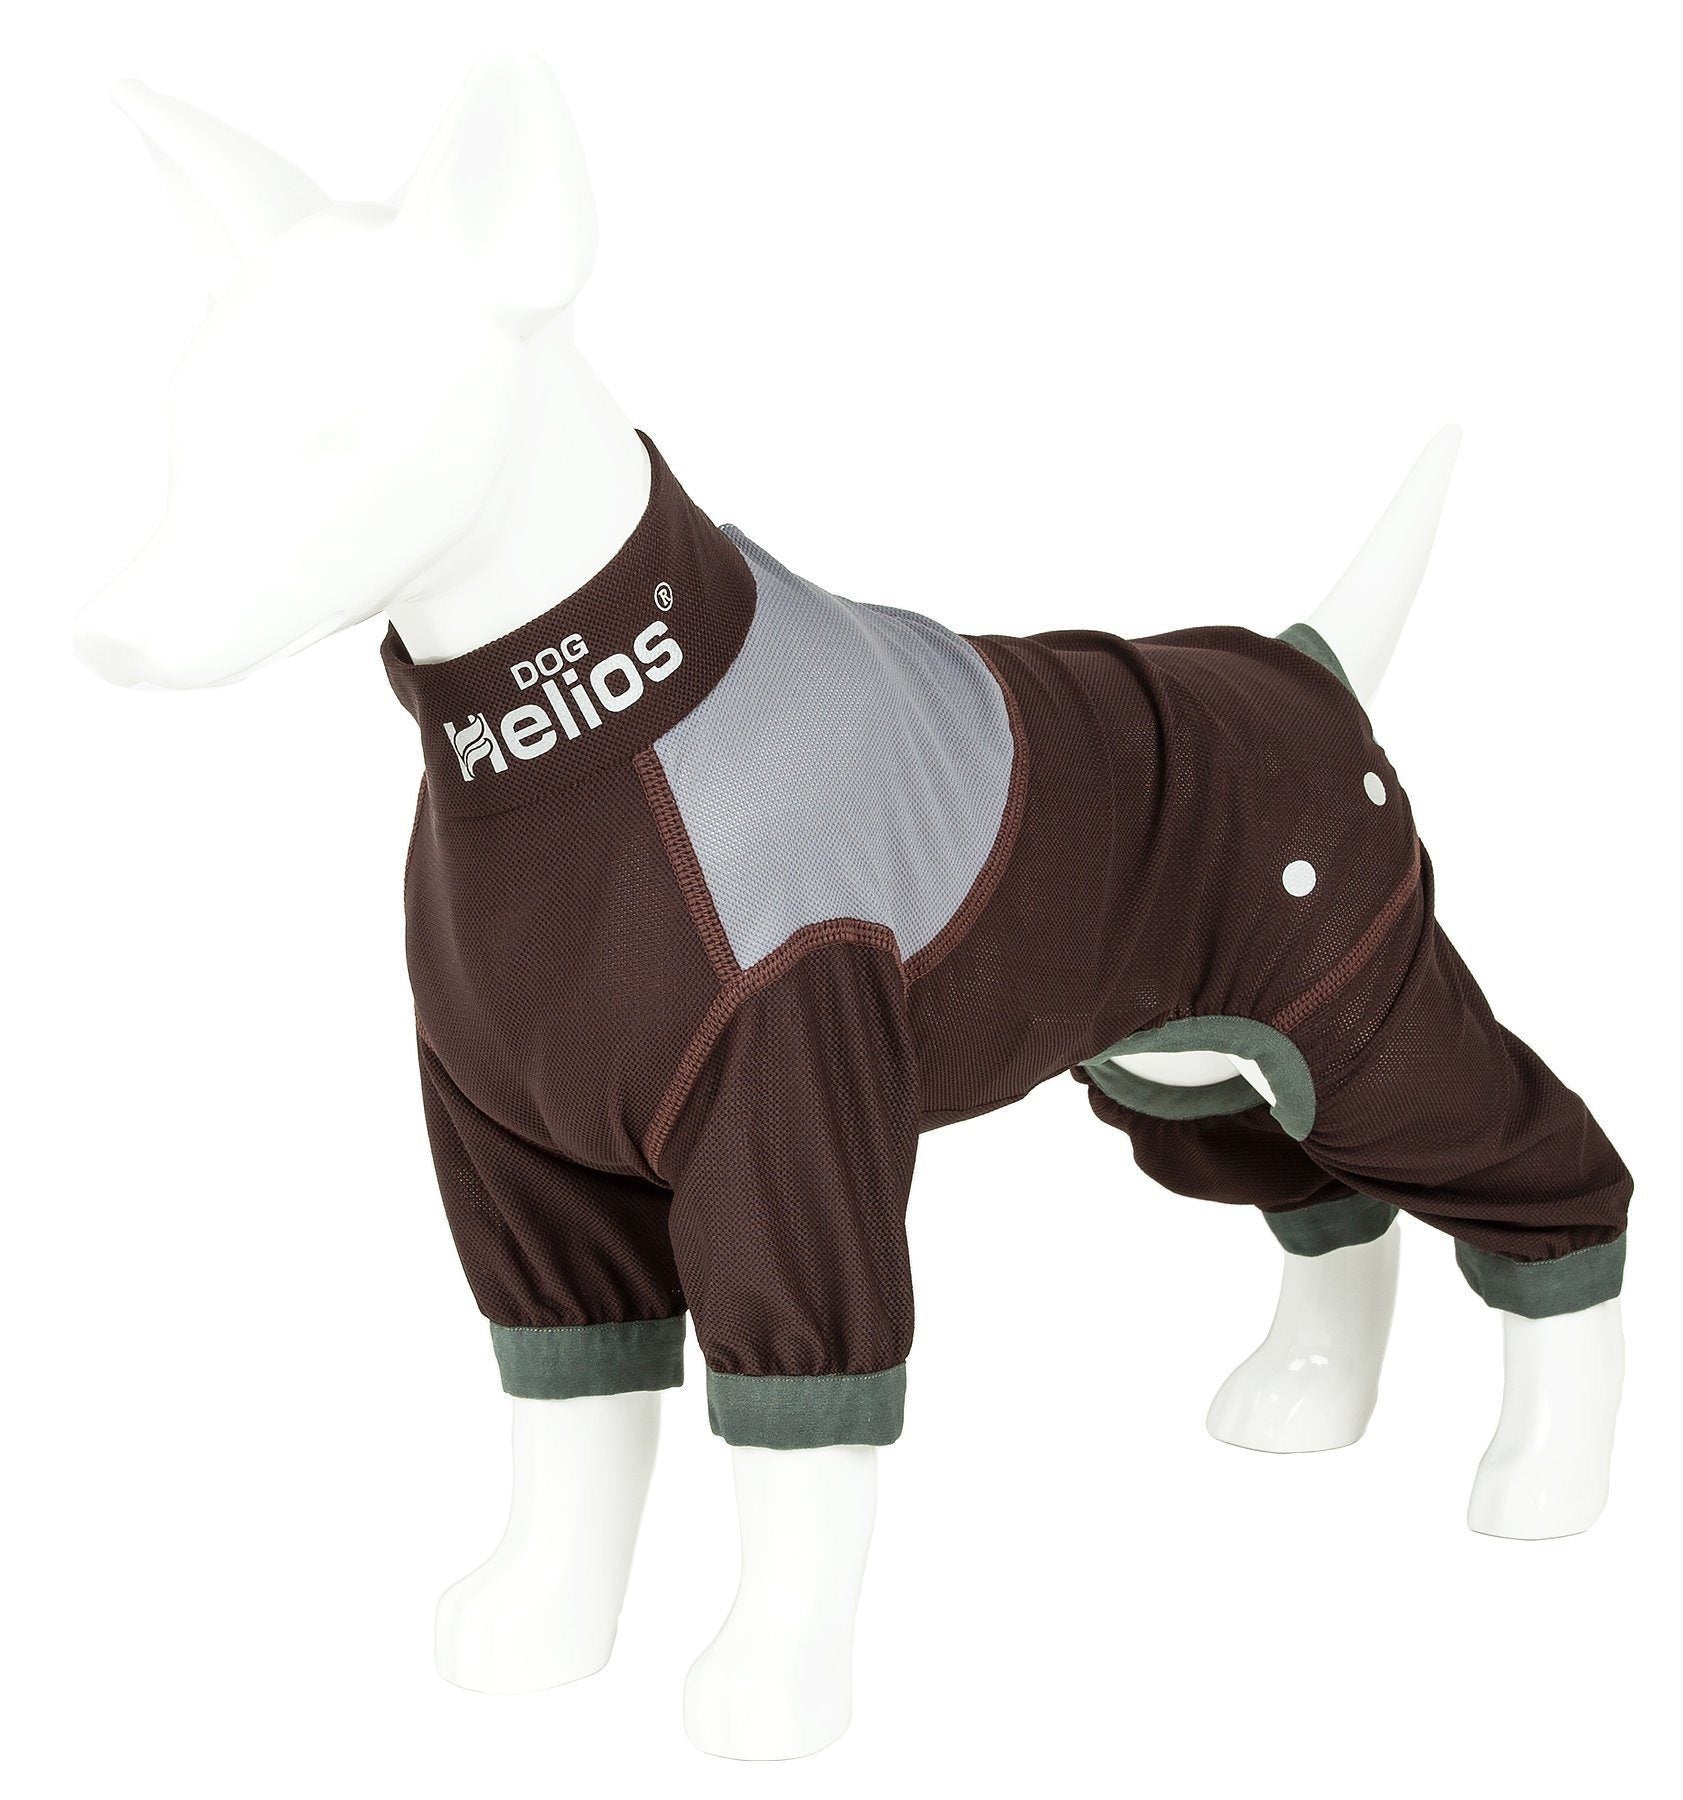 Dog Helios ® 'Tail Runner' Lightweight 4-Way-Stretch Breathable Yoga Dog Tracksuit X-Small Brown And Grey